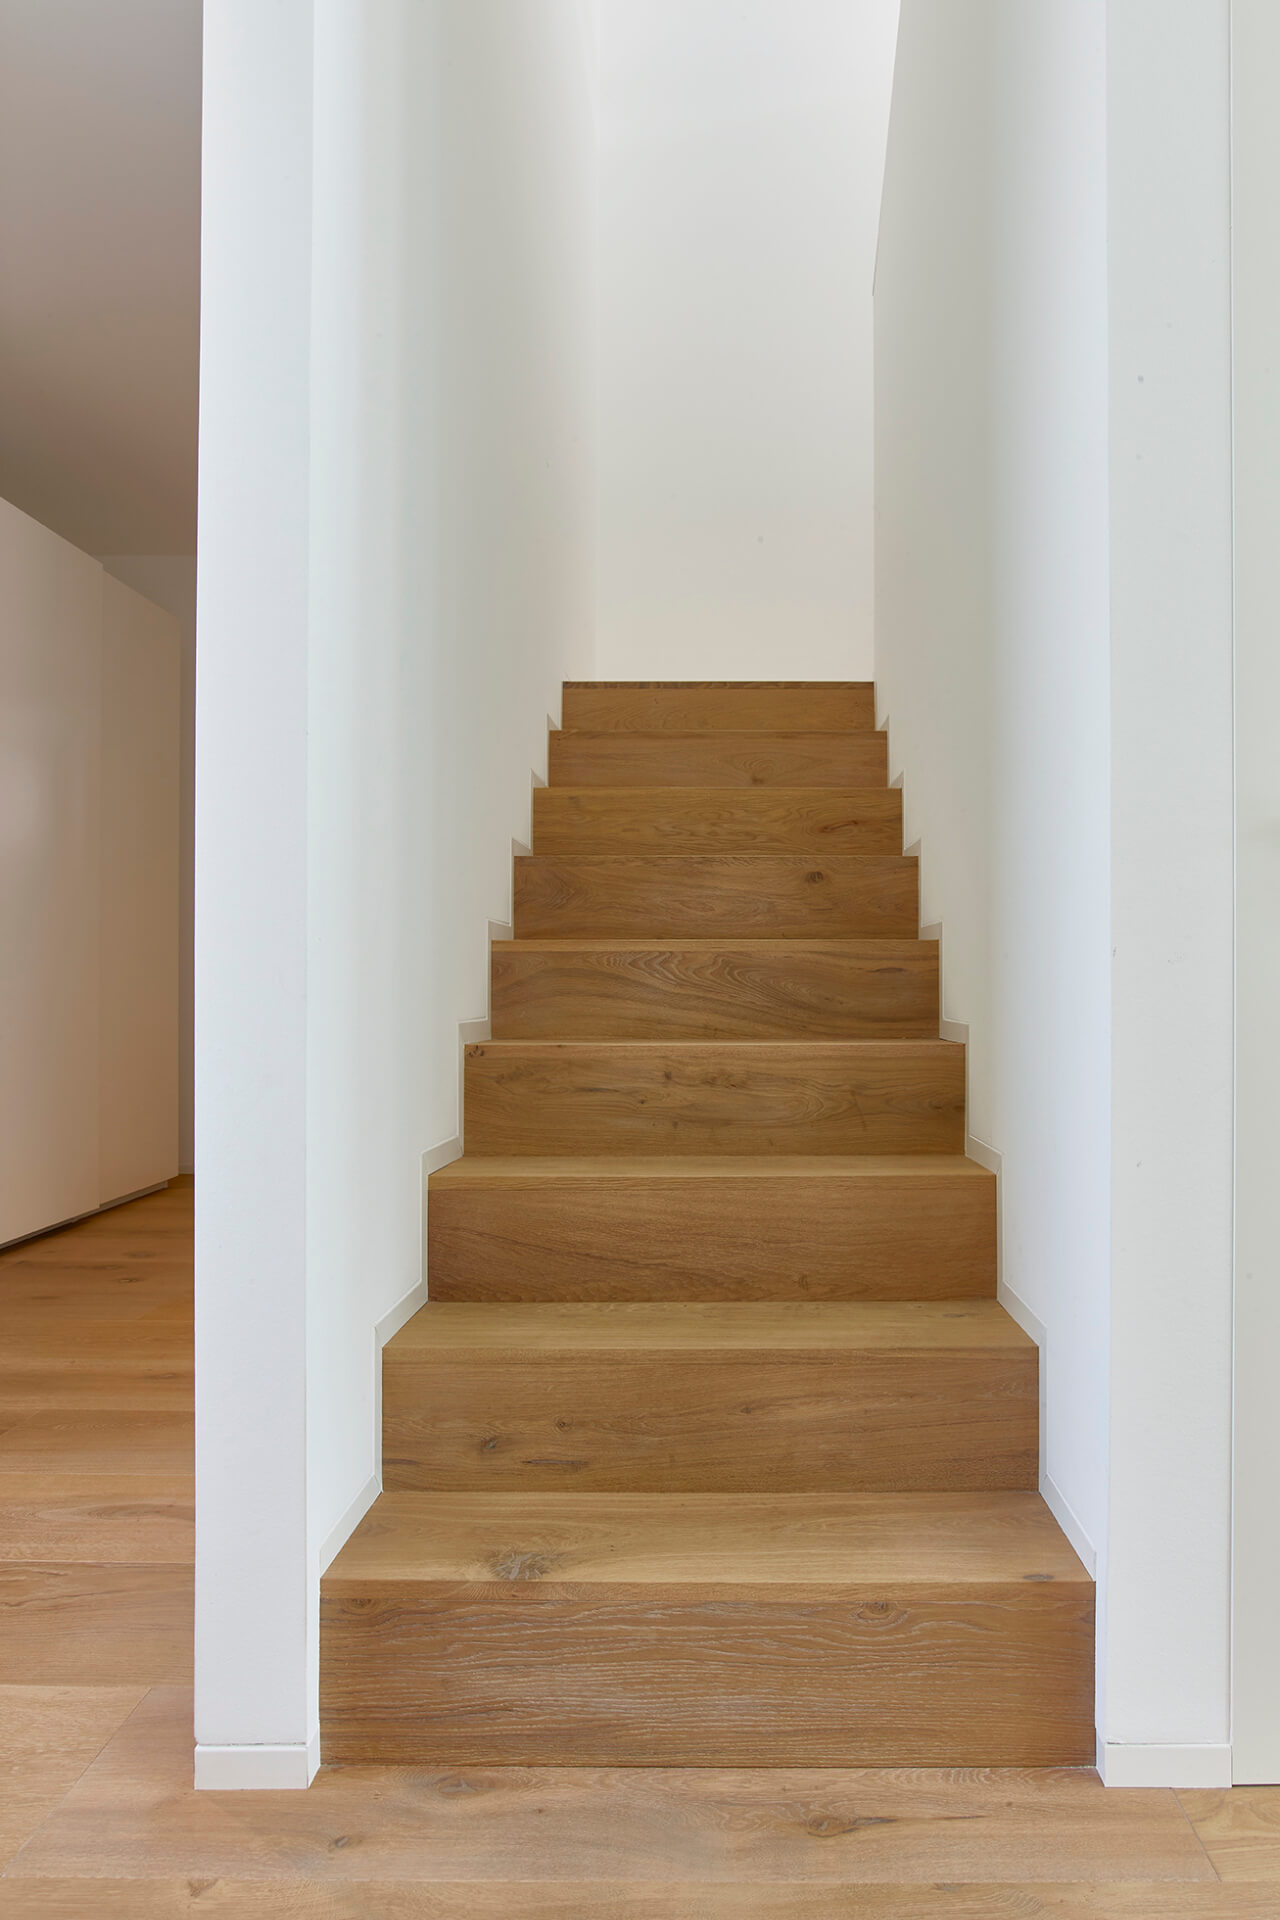 Stairs in living room with oak steps and matching floorboards